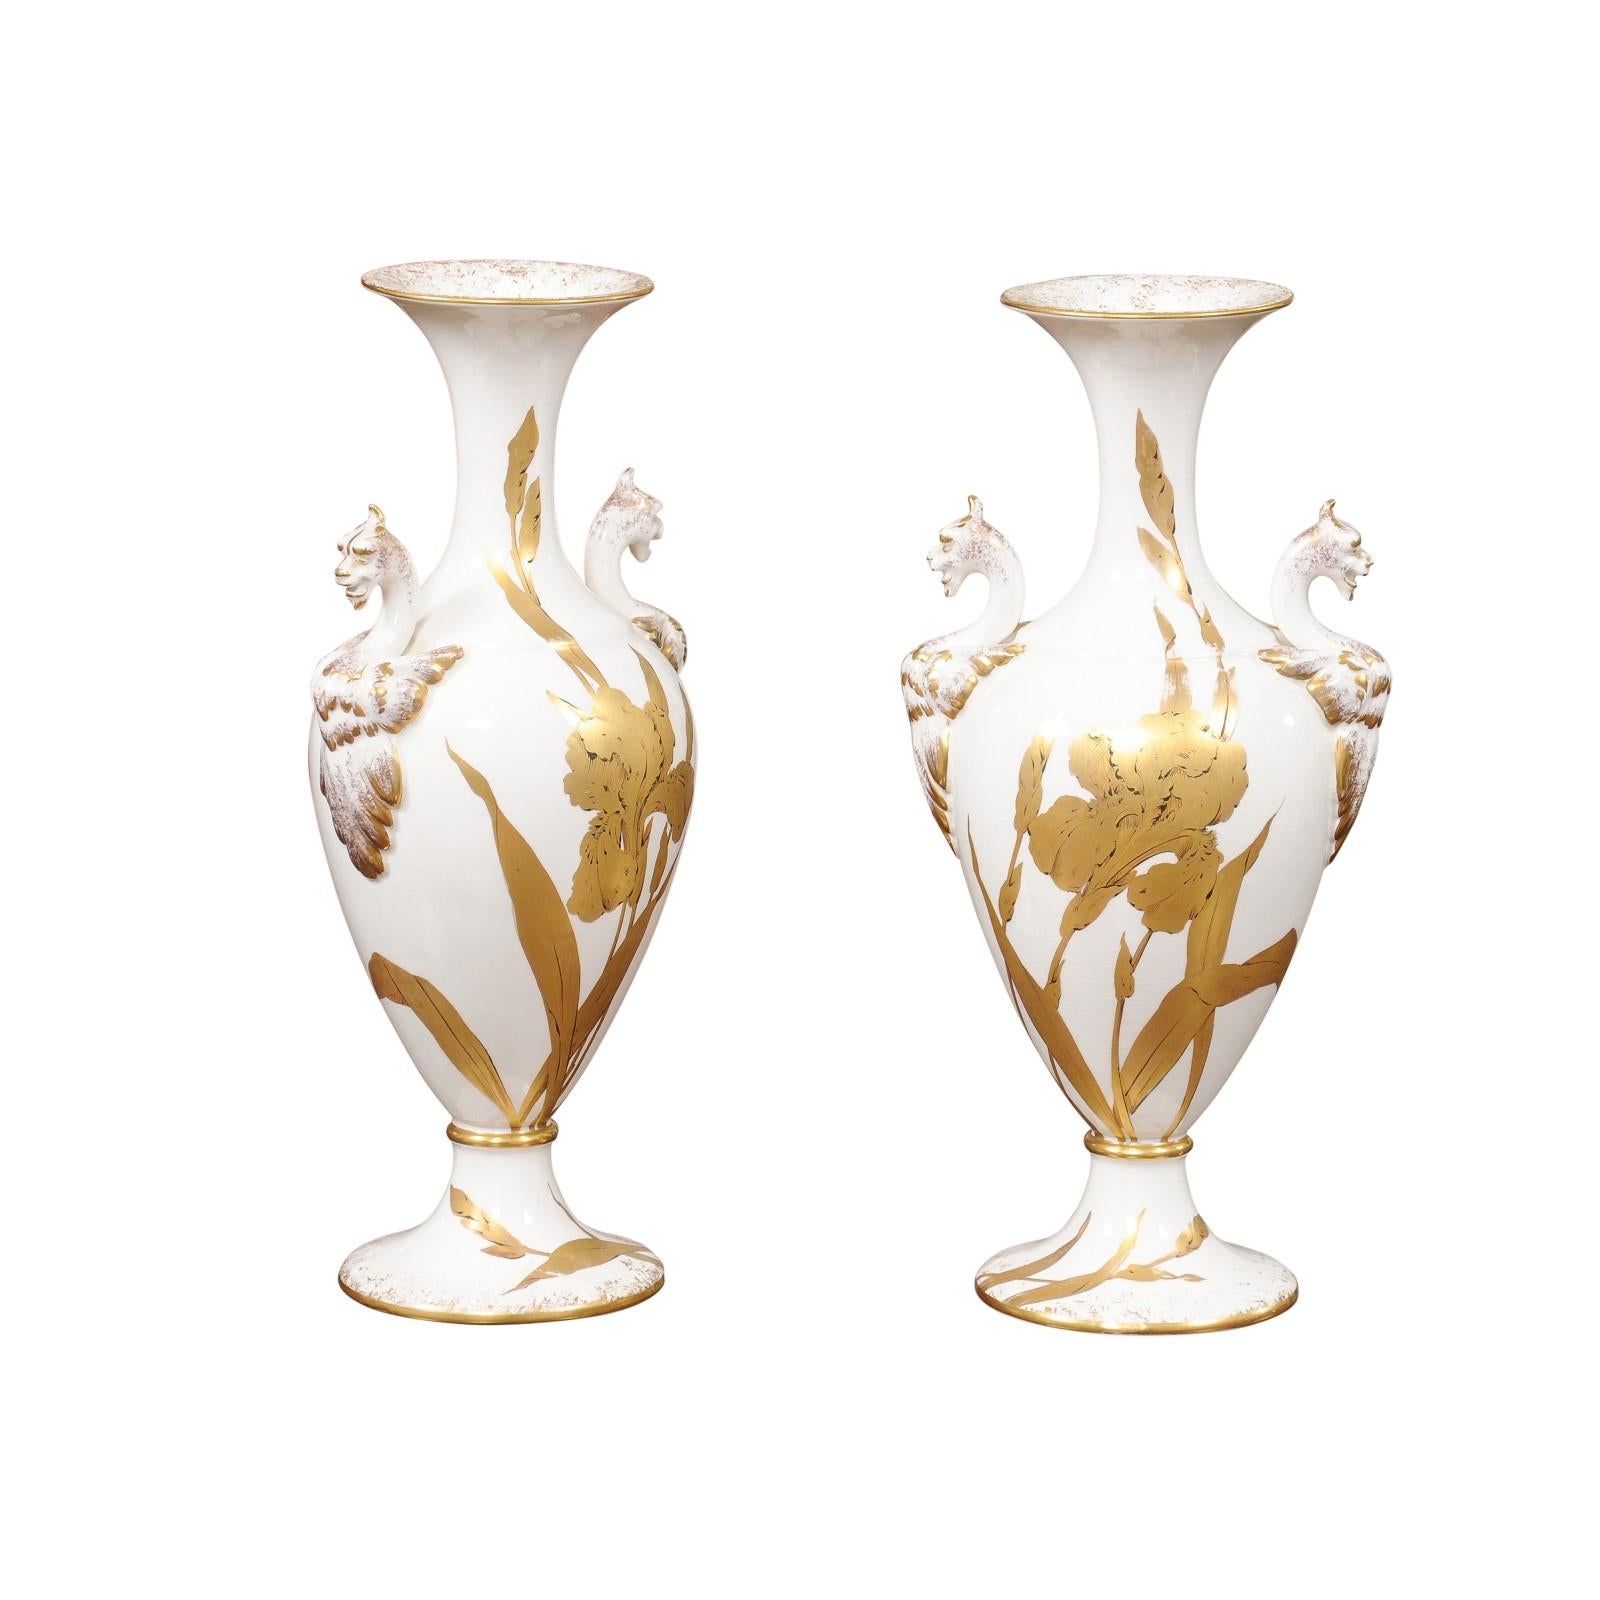 Pair of Porcelain Vases with Gilt Painted Irises, 20th Century Italy For Sale 6